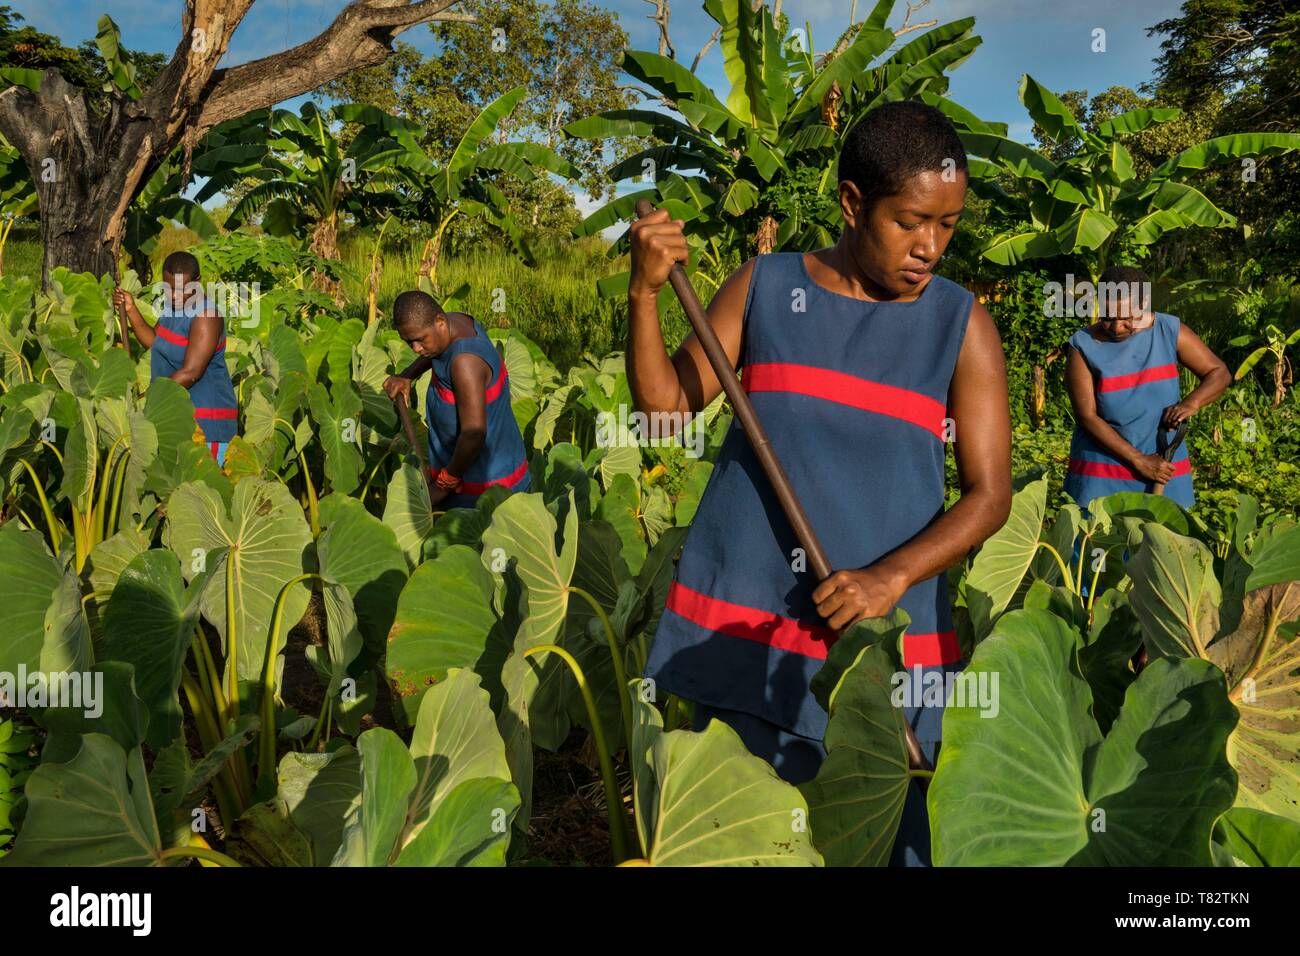 Papua New Guinea, Gulf of Papua, National Capital District, Port Moresby City, Bomana Prison, Female division, prisonners gardening Stock Photo